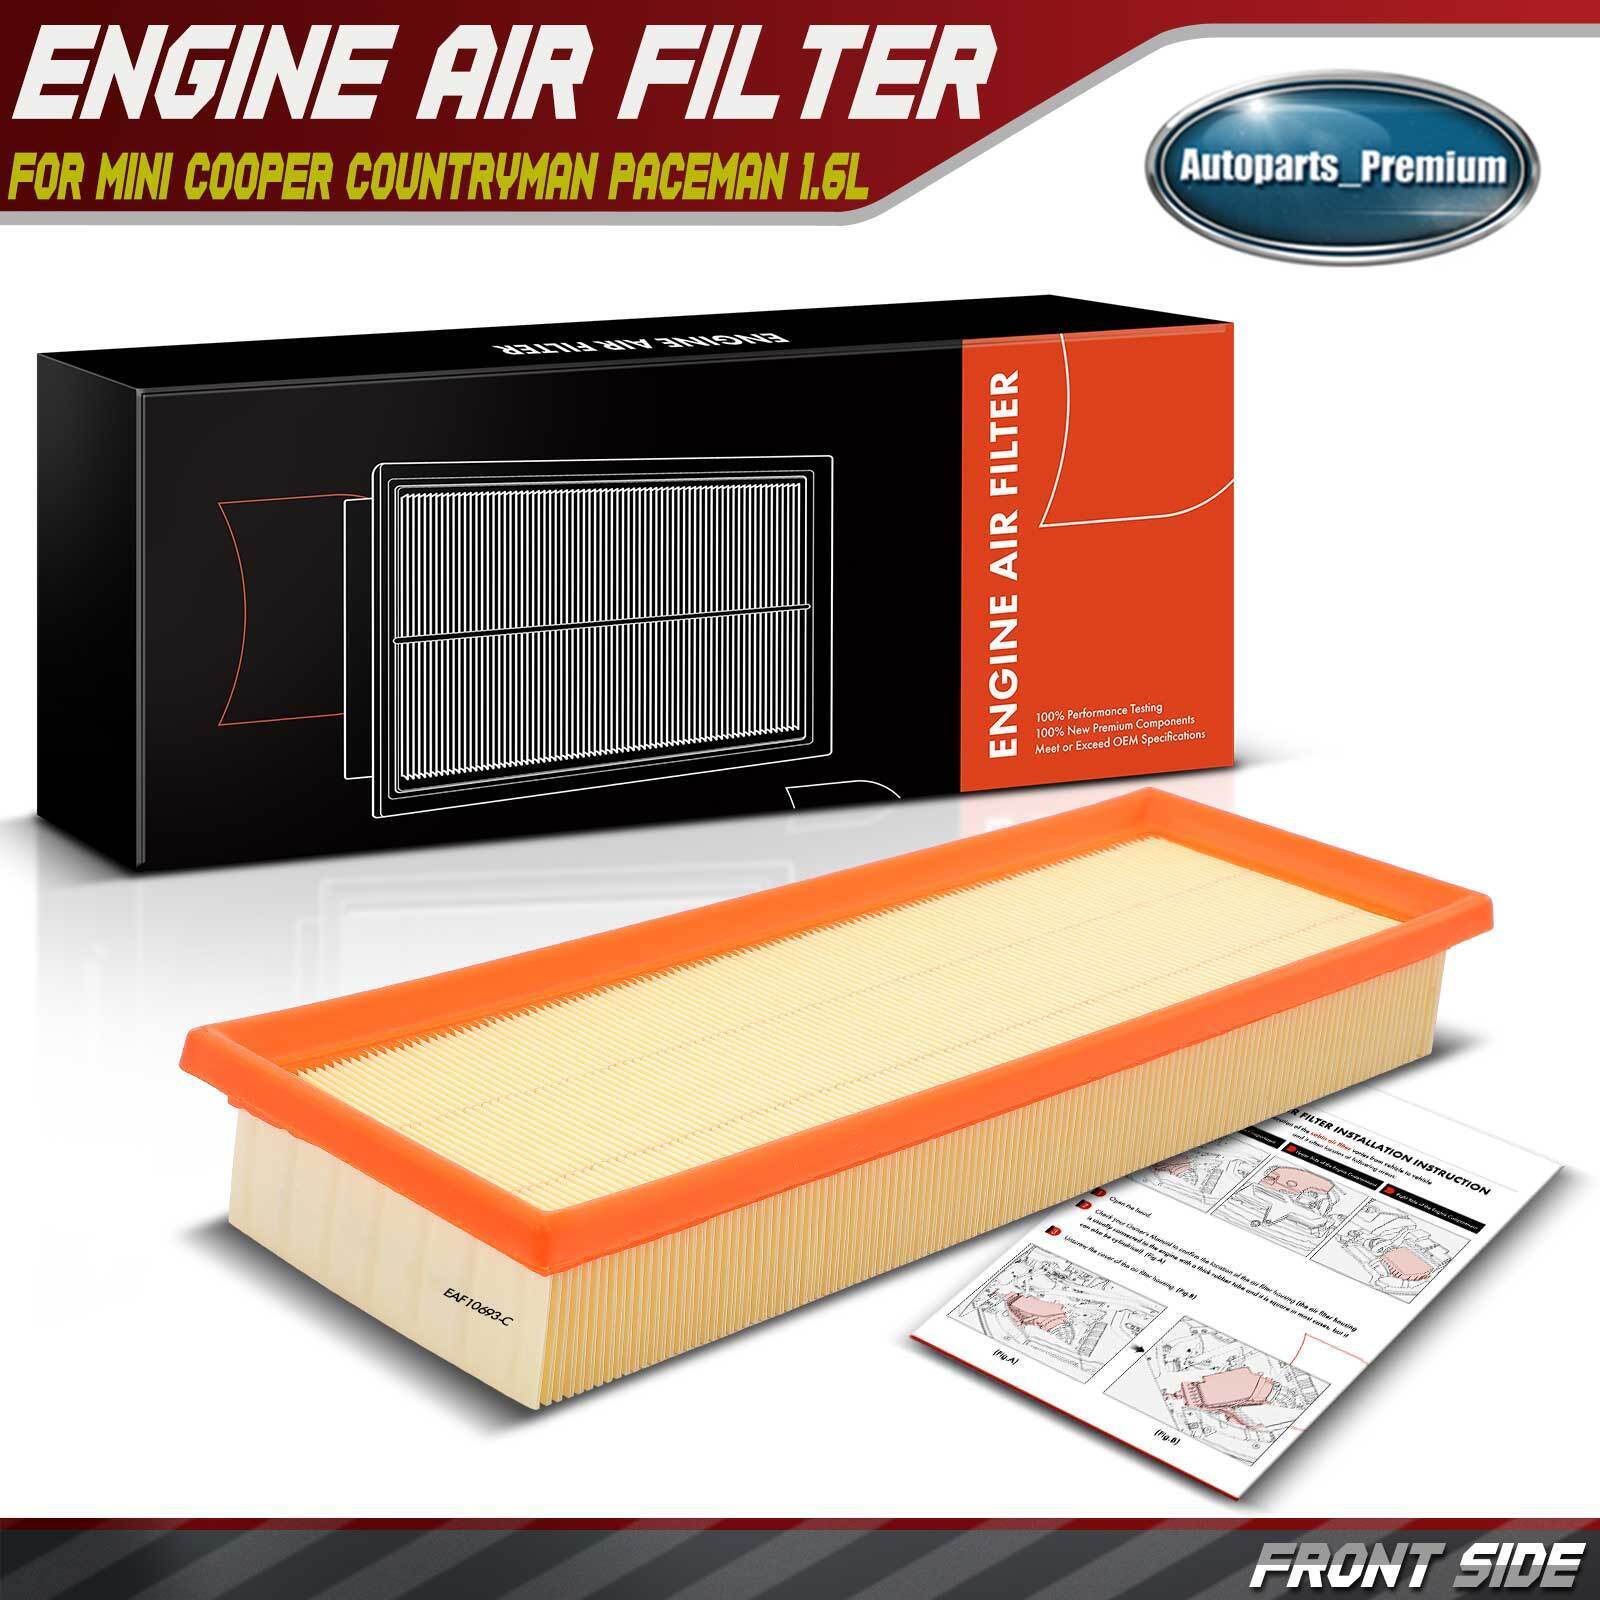 Engine Air Filter for Mini Cooper Countryman Paceman L4 1.6L Naturally Aspirated